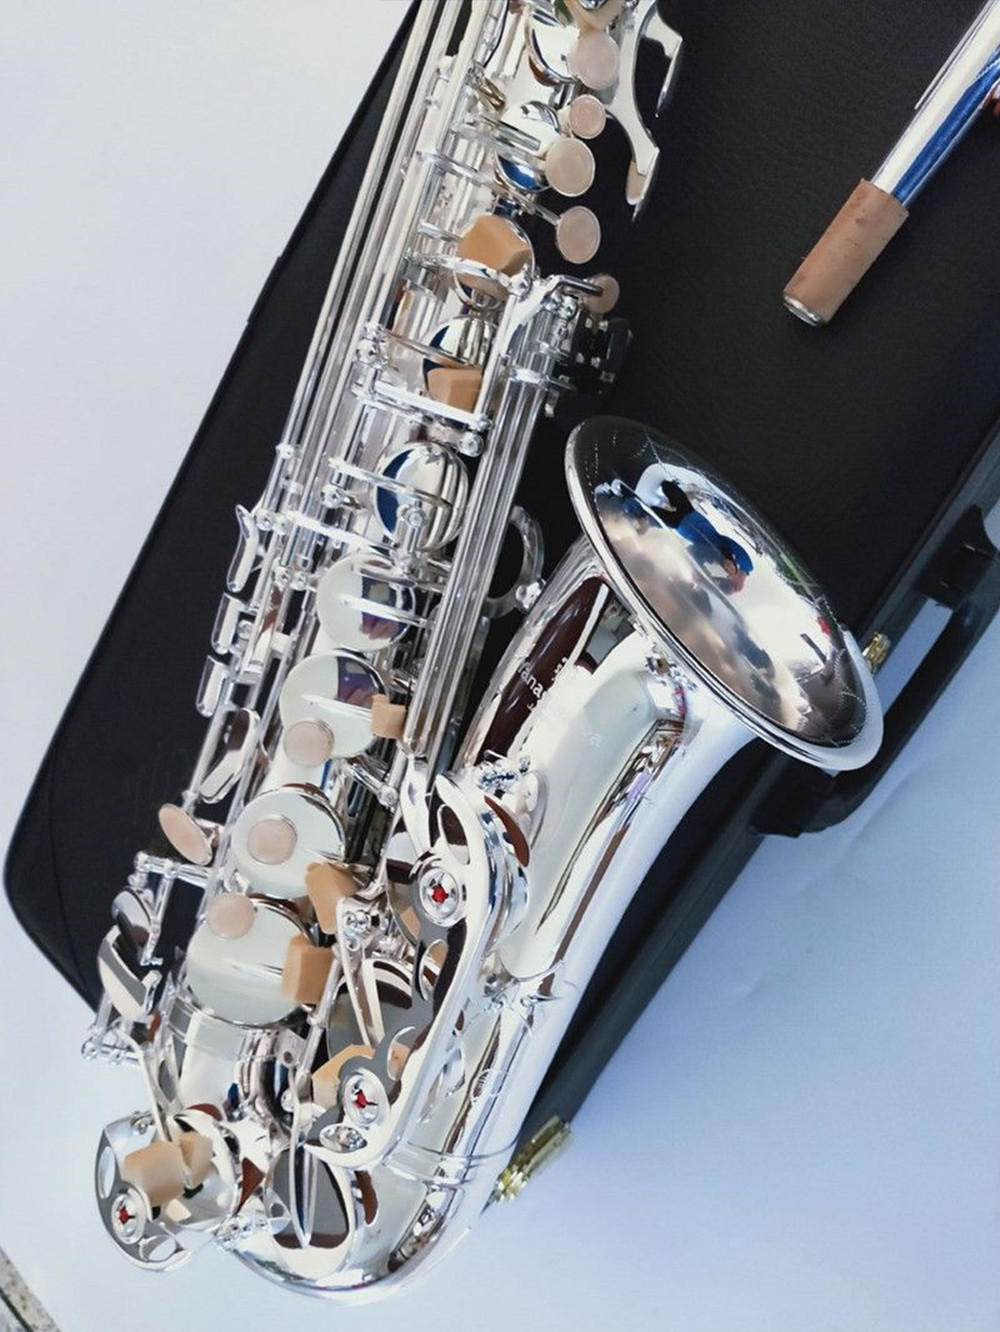 Brand Japan High Quality Alto Saxophone A-992 E-Flat Sax Silver Plated Papitre buccal Reed Necy Musical Instrument Musical